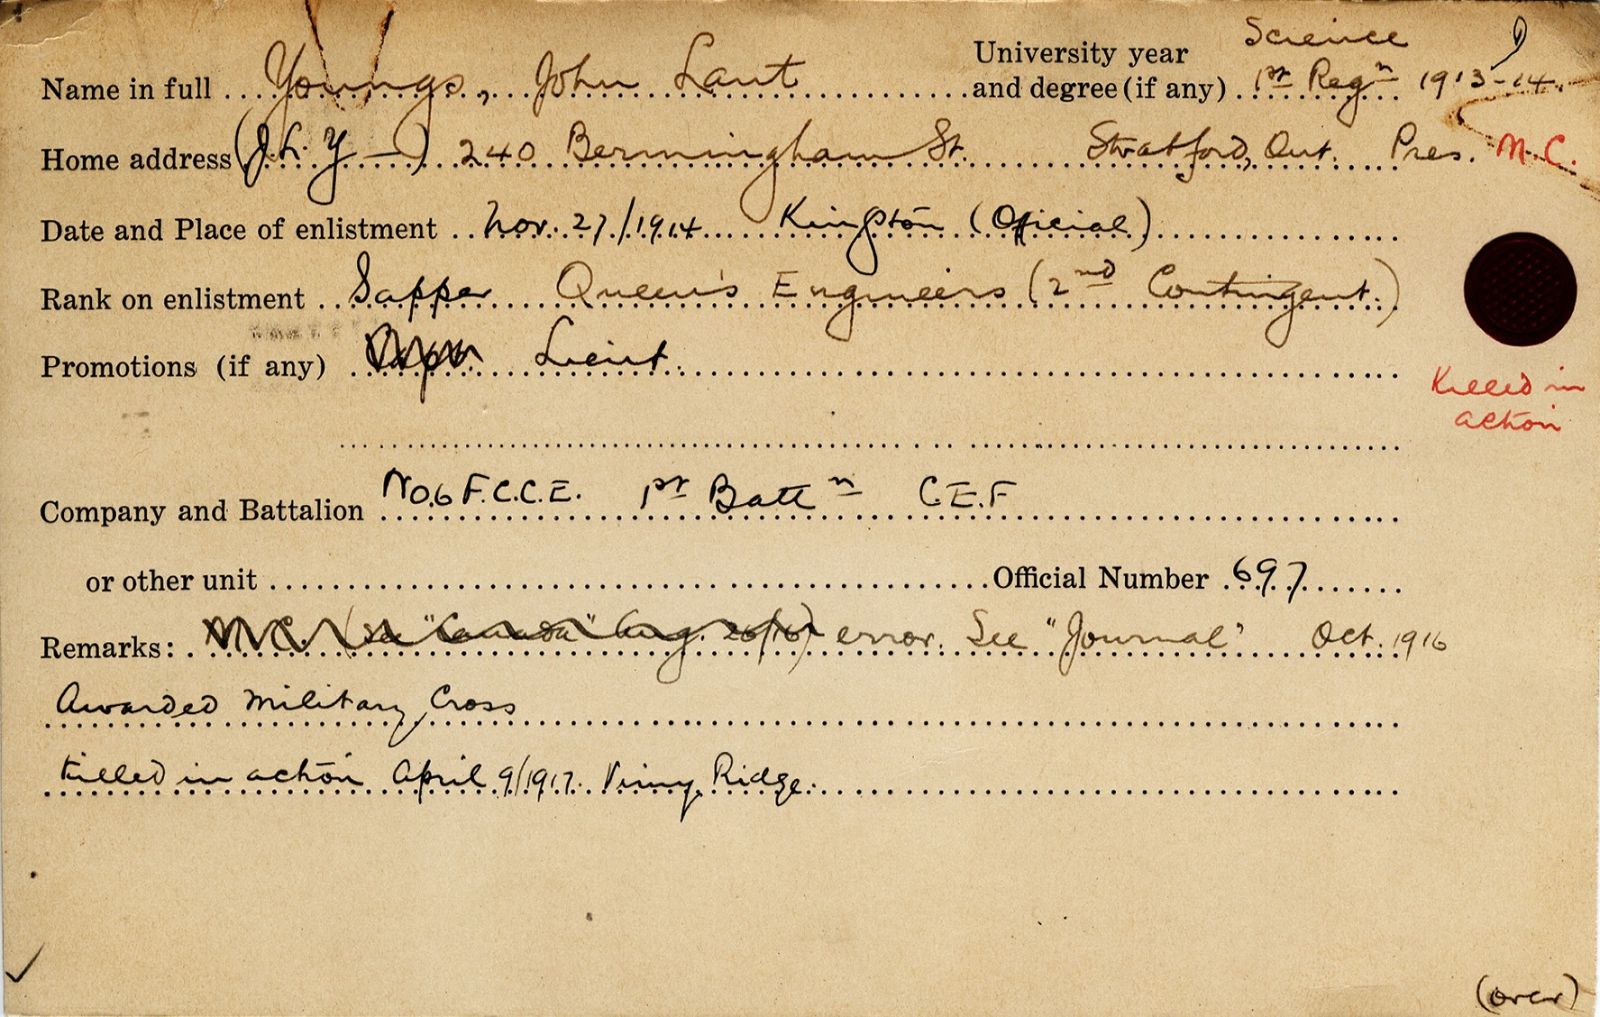 University Military Service Record of Youngs, Front Page